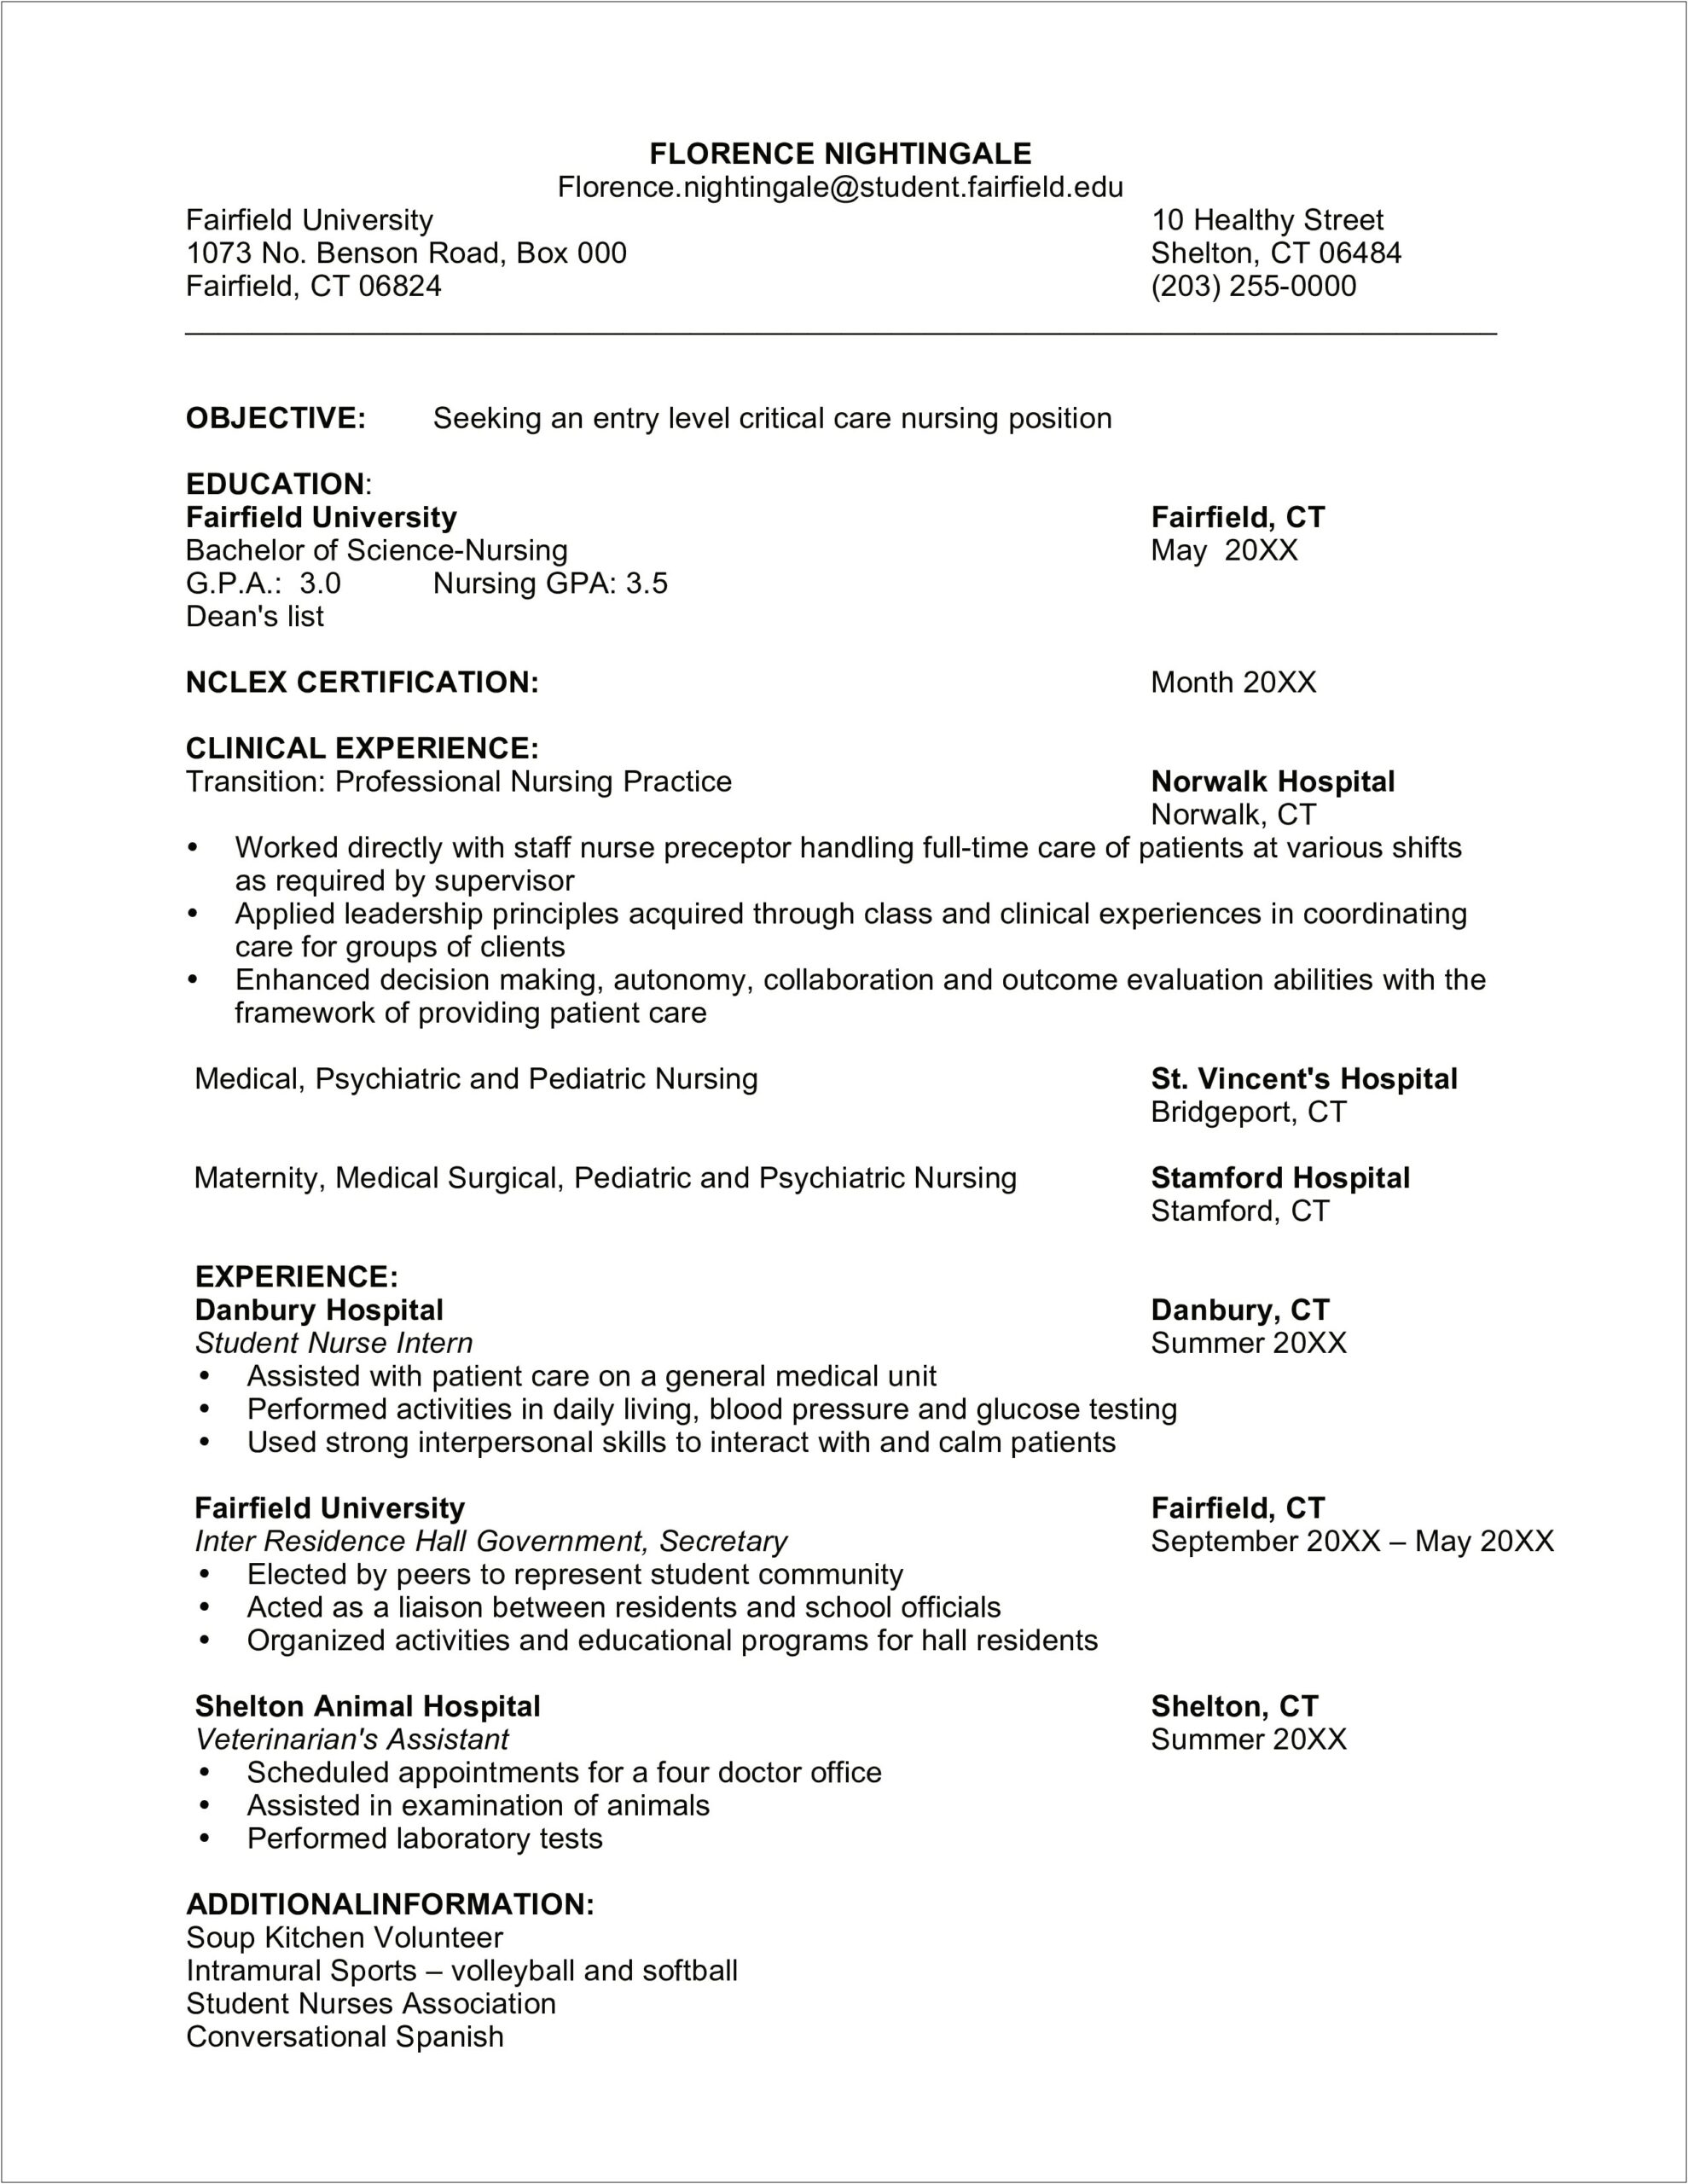 Entry Level Computer Science Resume Template